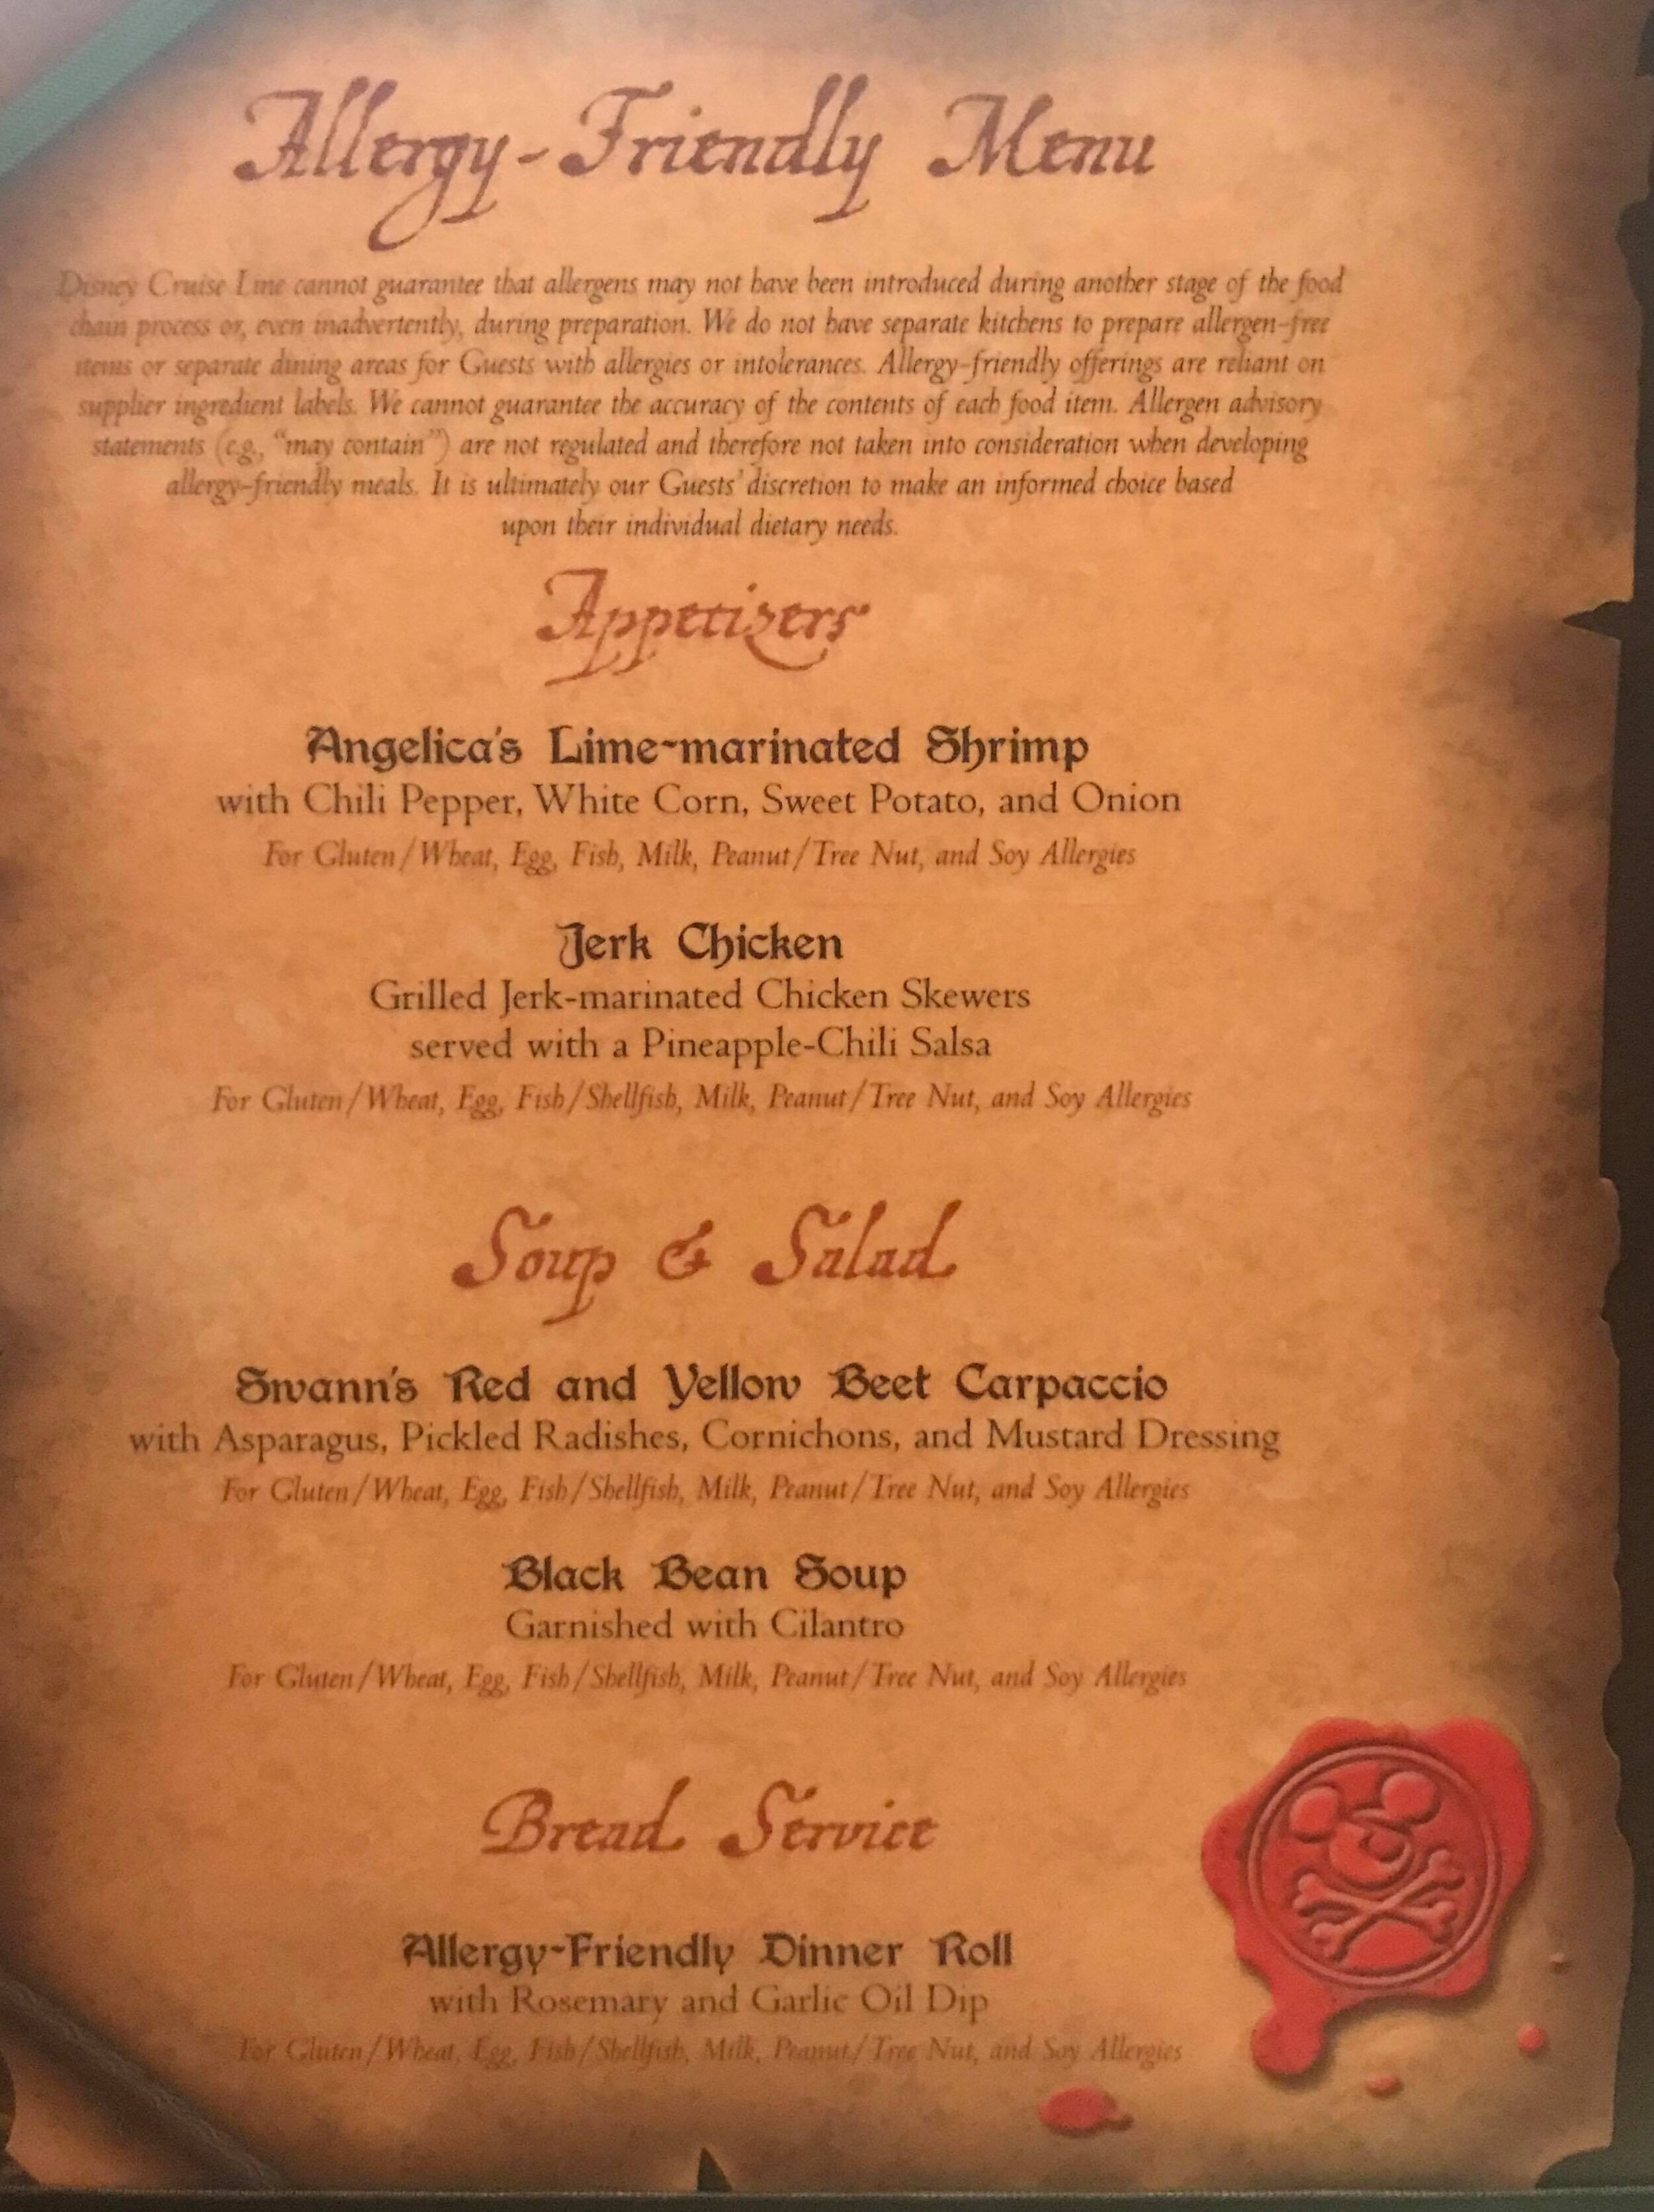 Disney Cruise Pirate Night Dinner Menu - The Mommy Mouse Clubhouse